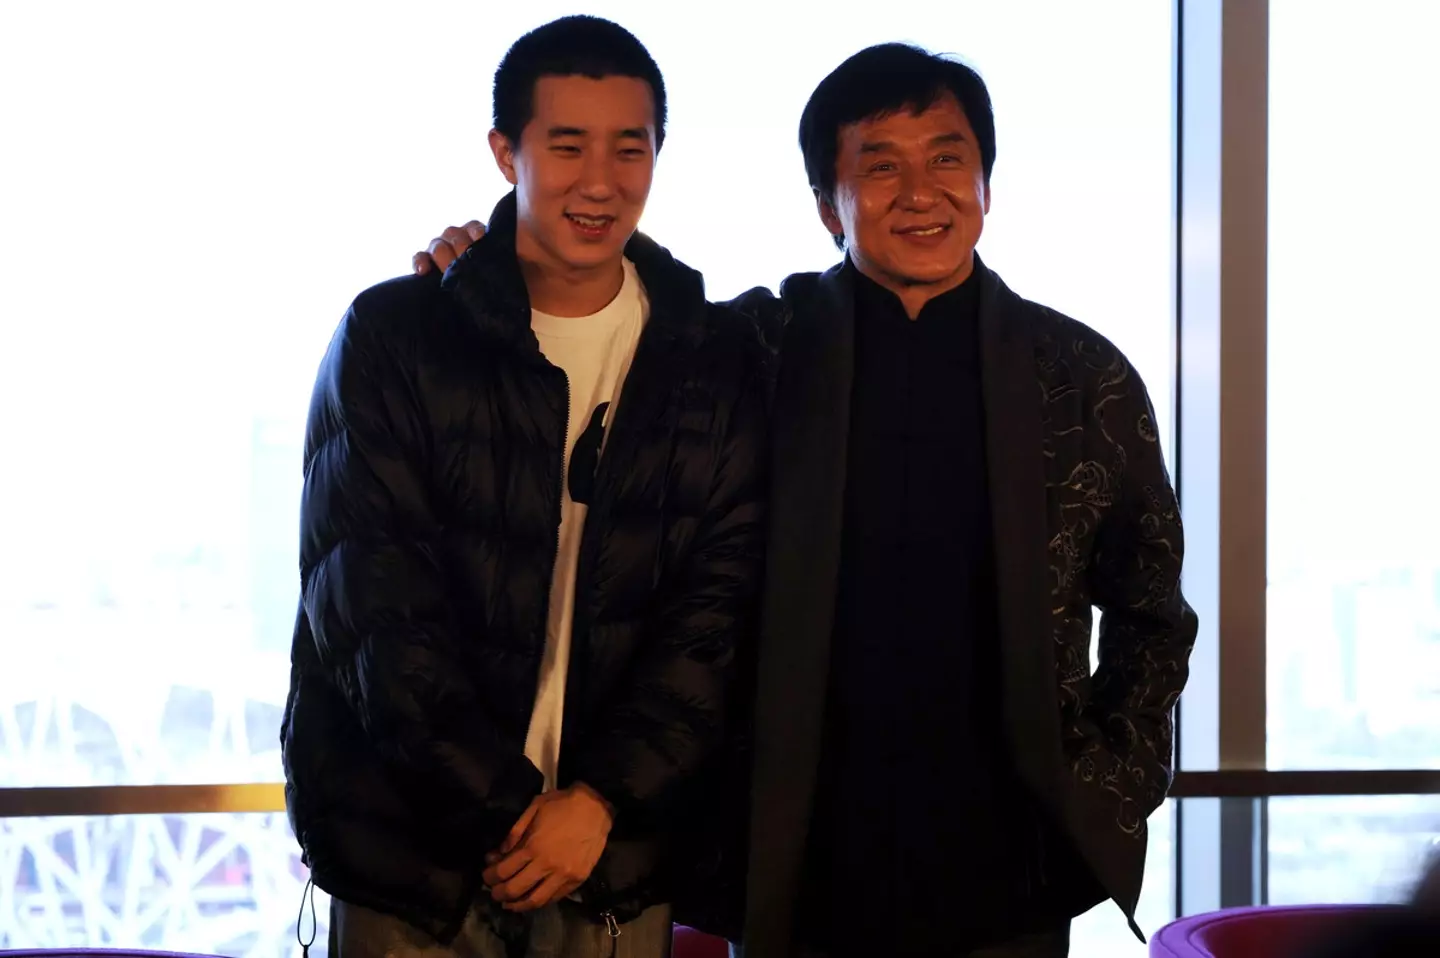 Jackie Chan admitted to throwing his son Jaycee across a room when the boy was two.